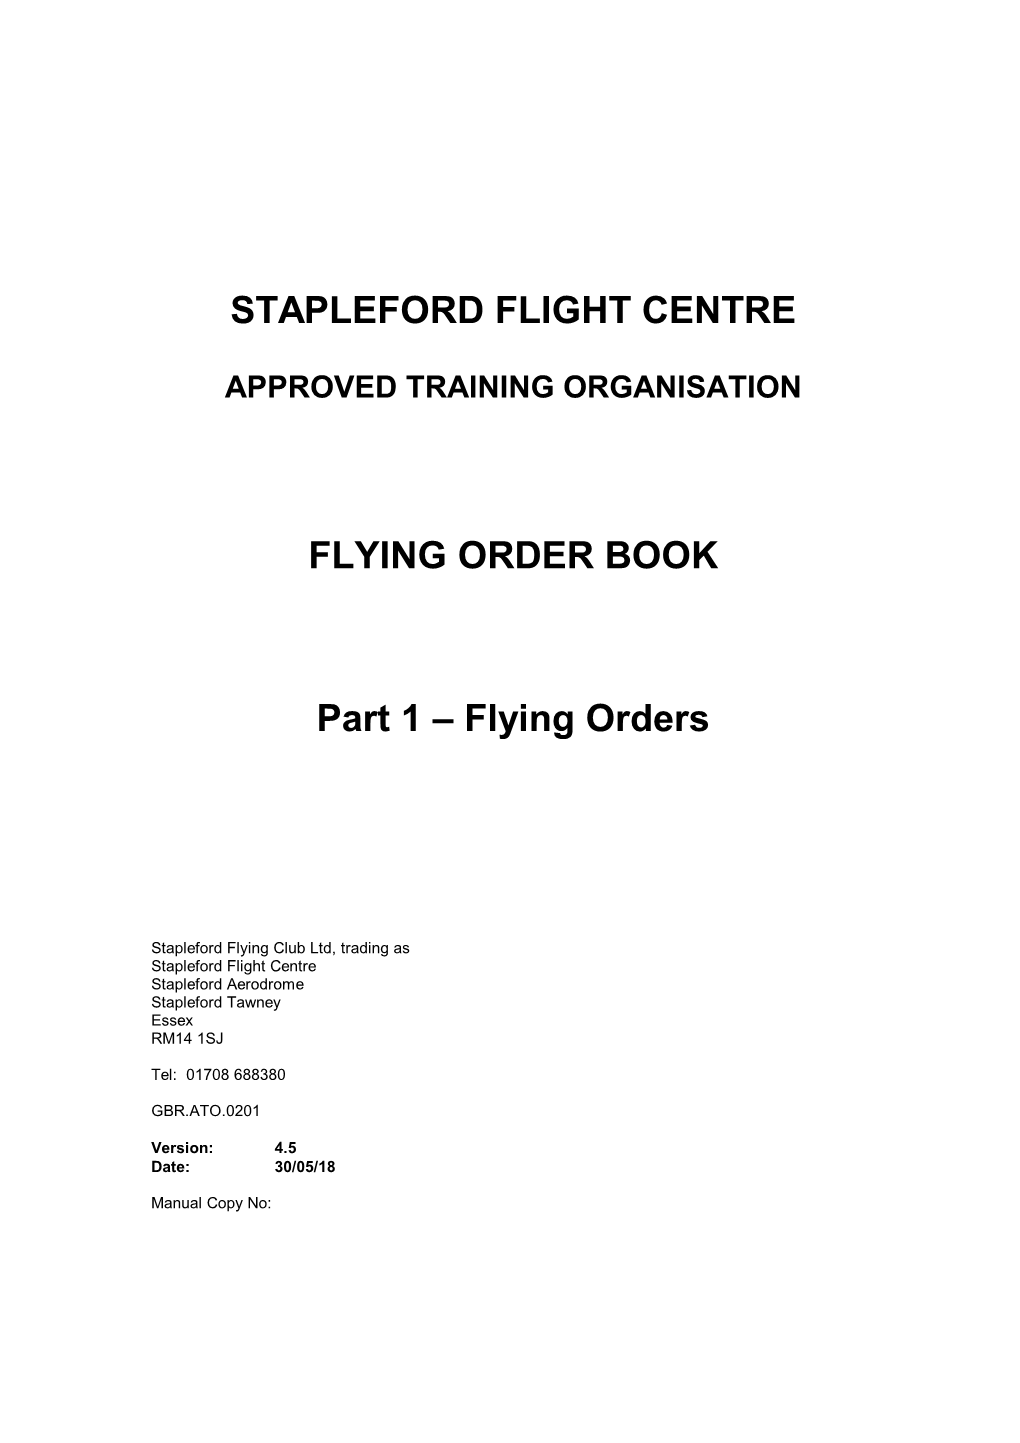 SFC Flying Order Book Are Now Current